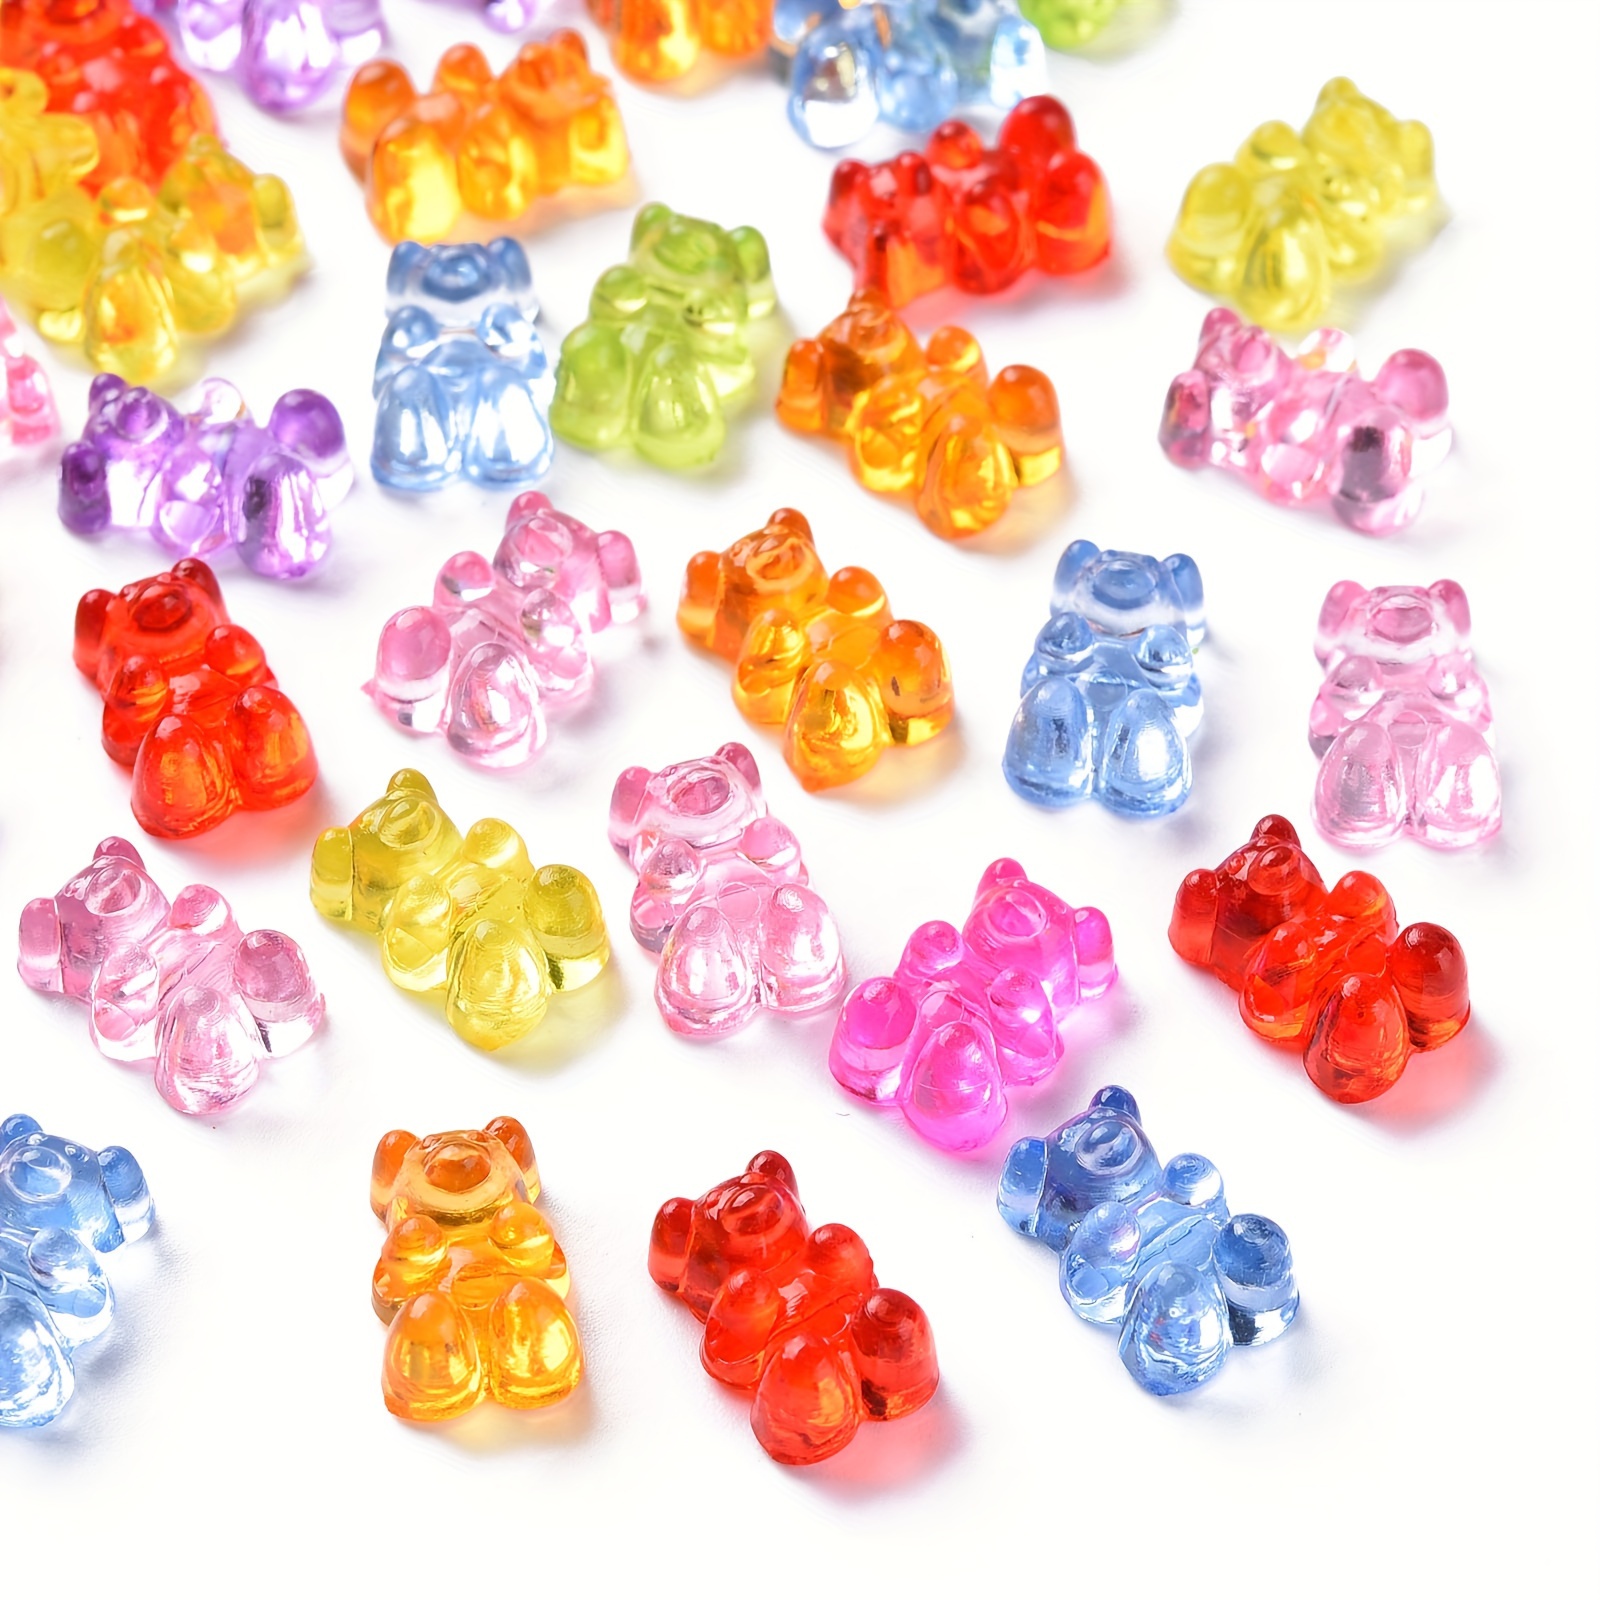 50 Pieces Nail Glitter Gummy Bear Charms,Resin Flatbacks Candy Bear Charms for Slime Nails DIY Craft Scrapbooking Phone Case Doll House Stationery